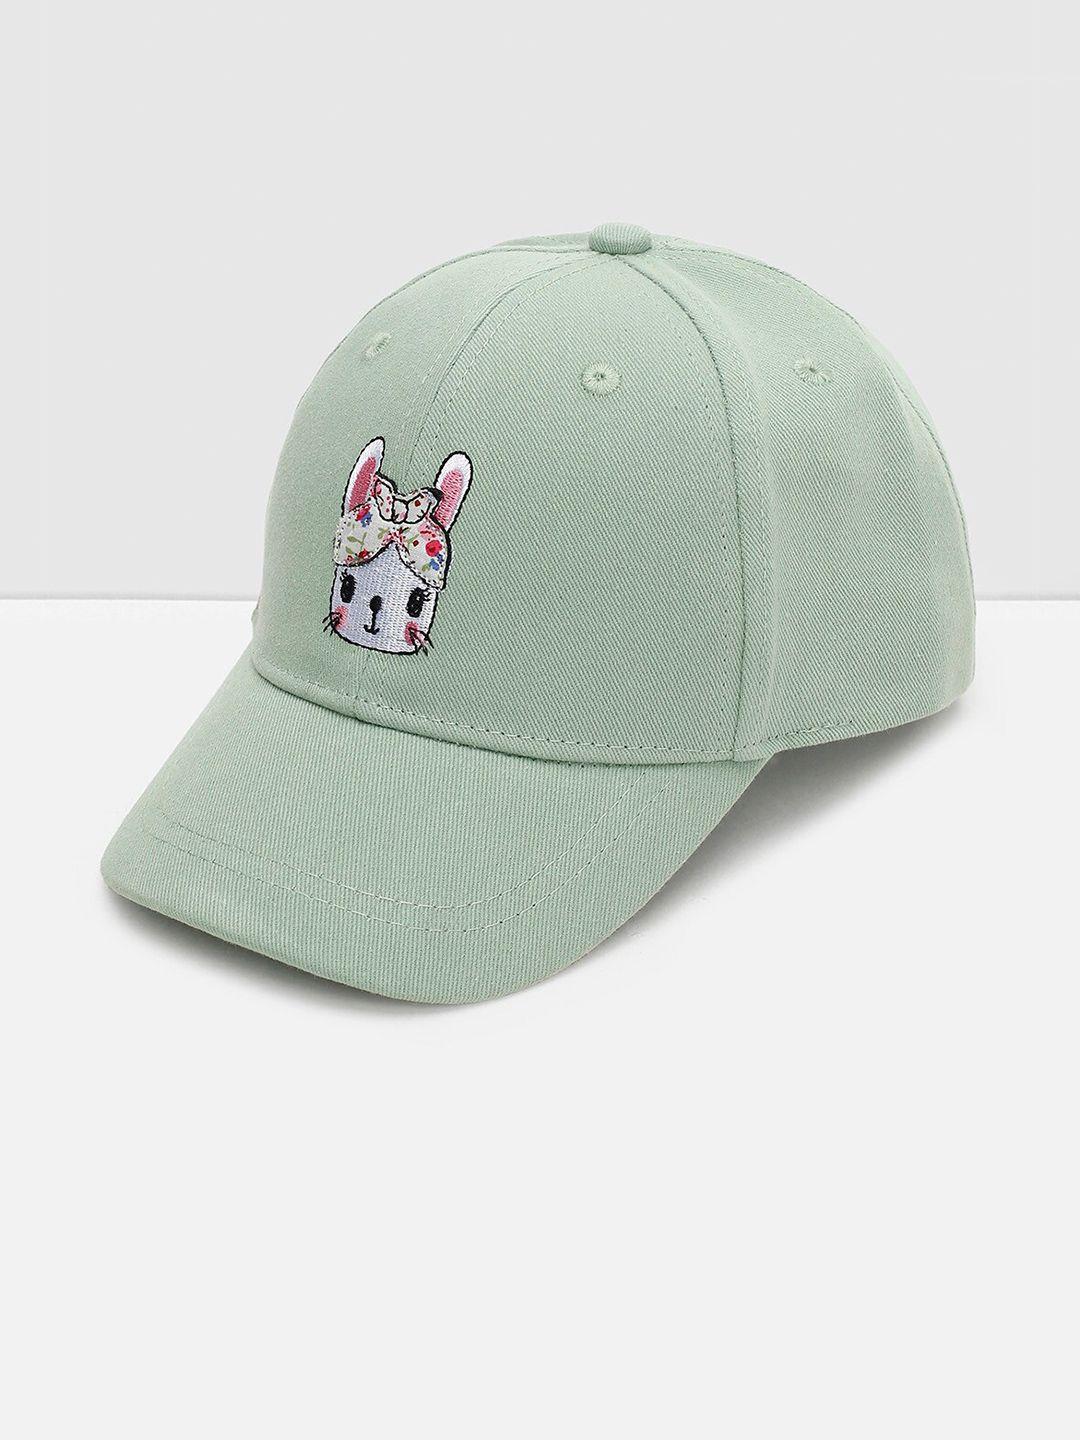 max-girls-embroidered-cotton-baseball-cap